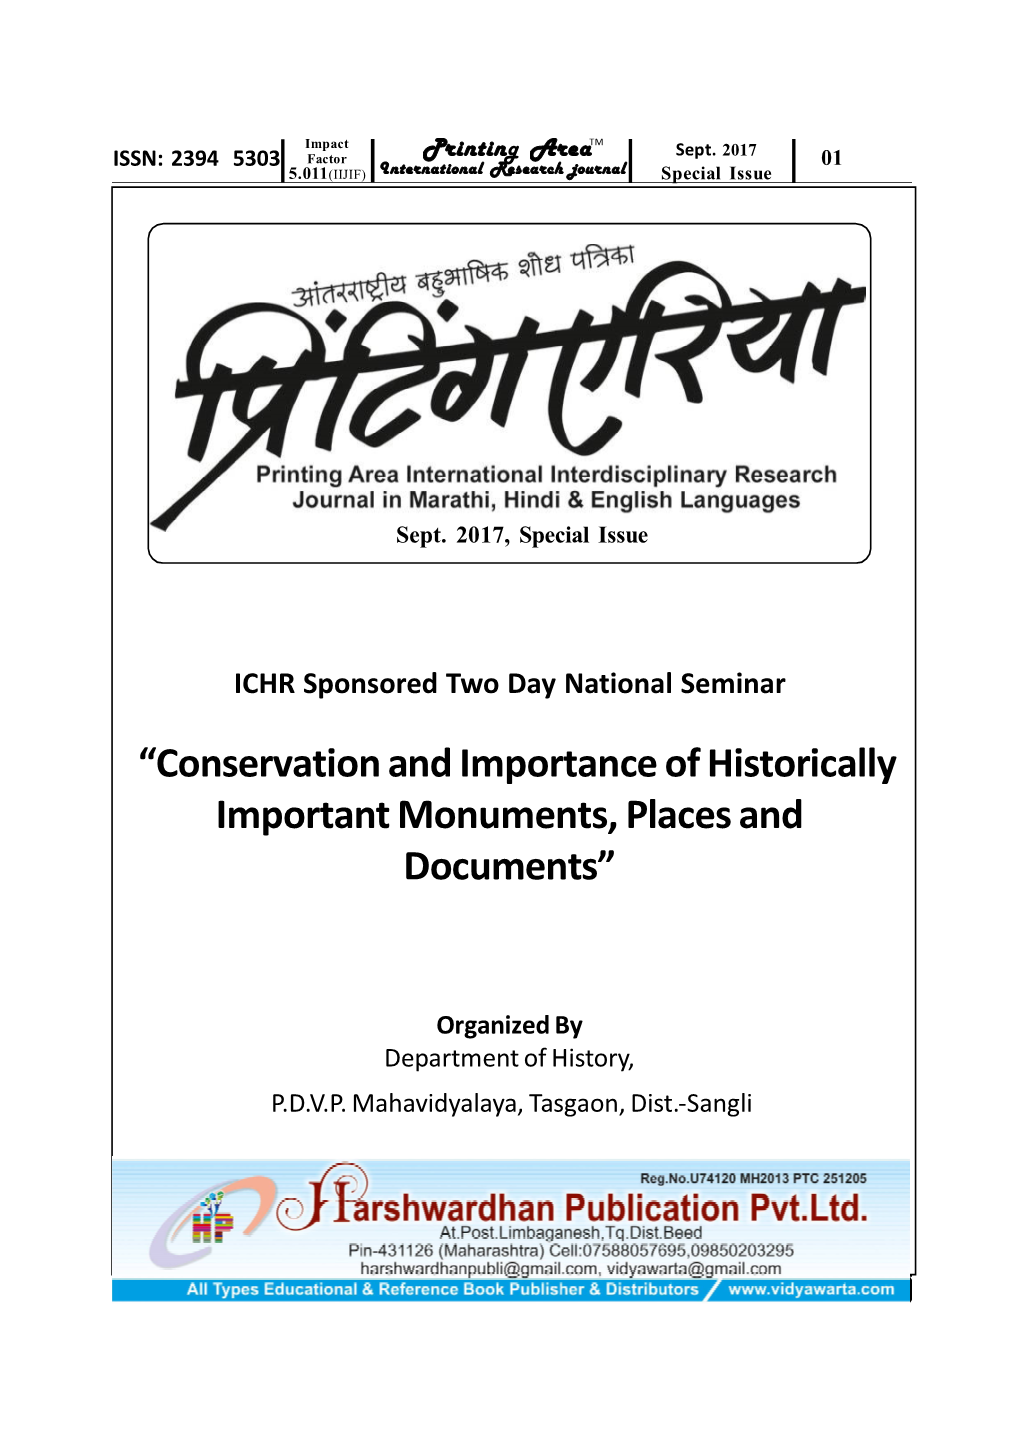 Conservation and Importance of Historically Important Monuments, Places and Documents”